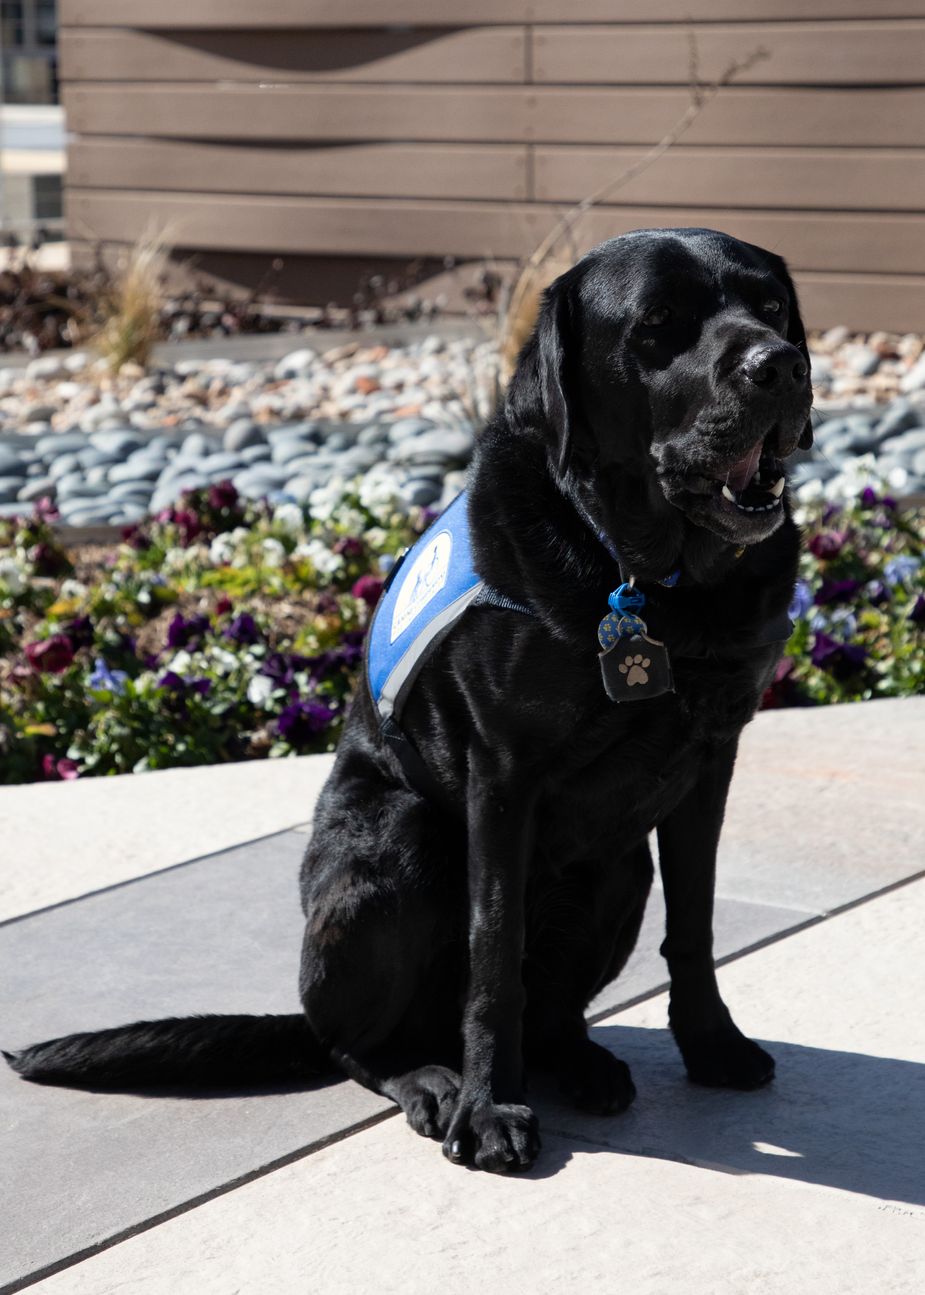 Raisin is set to retire as a service dog at the end of May. Photo by Phillip Ybarra